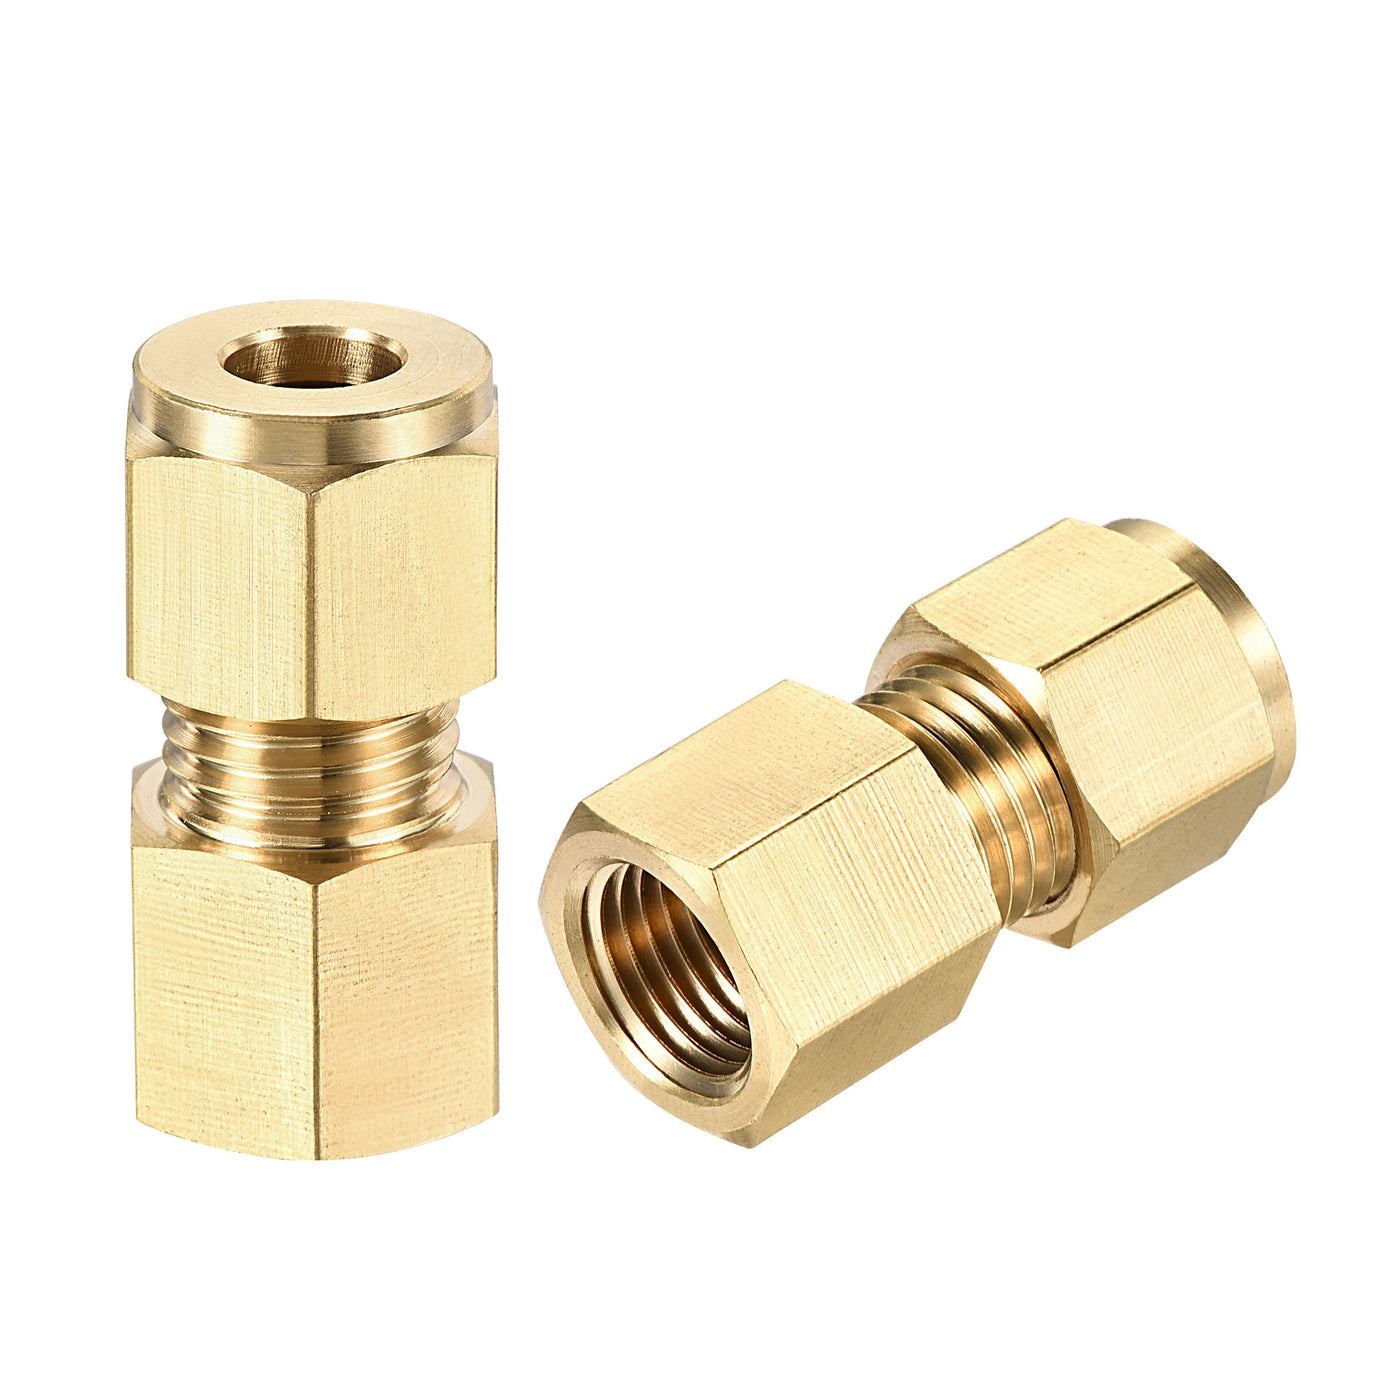 Uxcell Uxcell Compression Tube Fitting G1/4 Female Thread x 10mm Tube OD Straight Coupling Adapter Brass, 2pcs